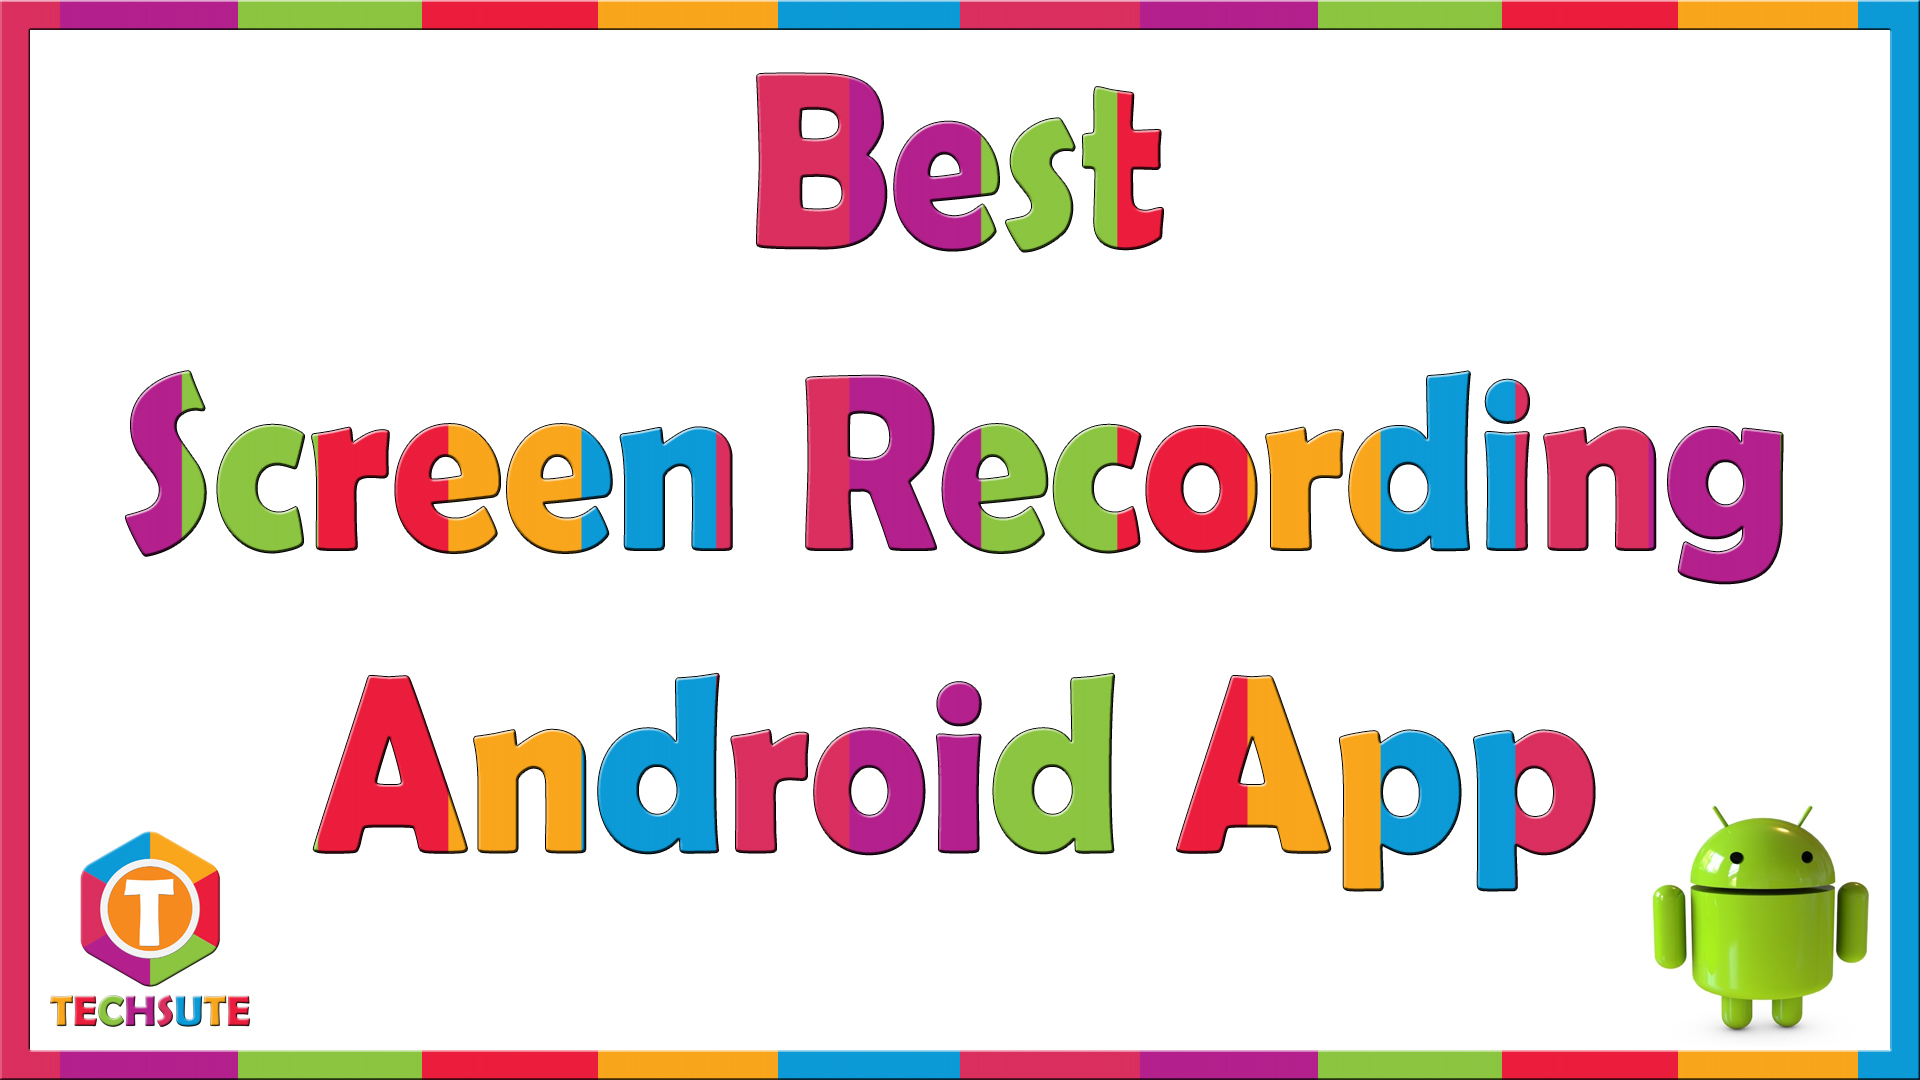 Best Screen Recording Android App